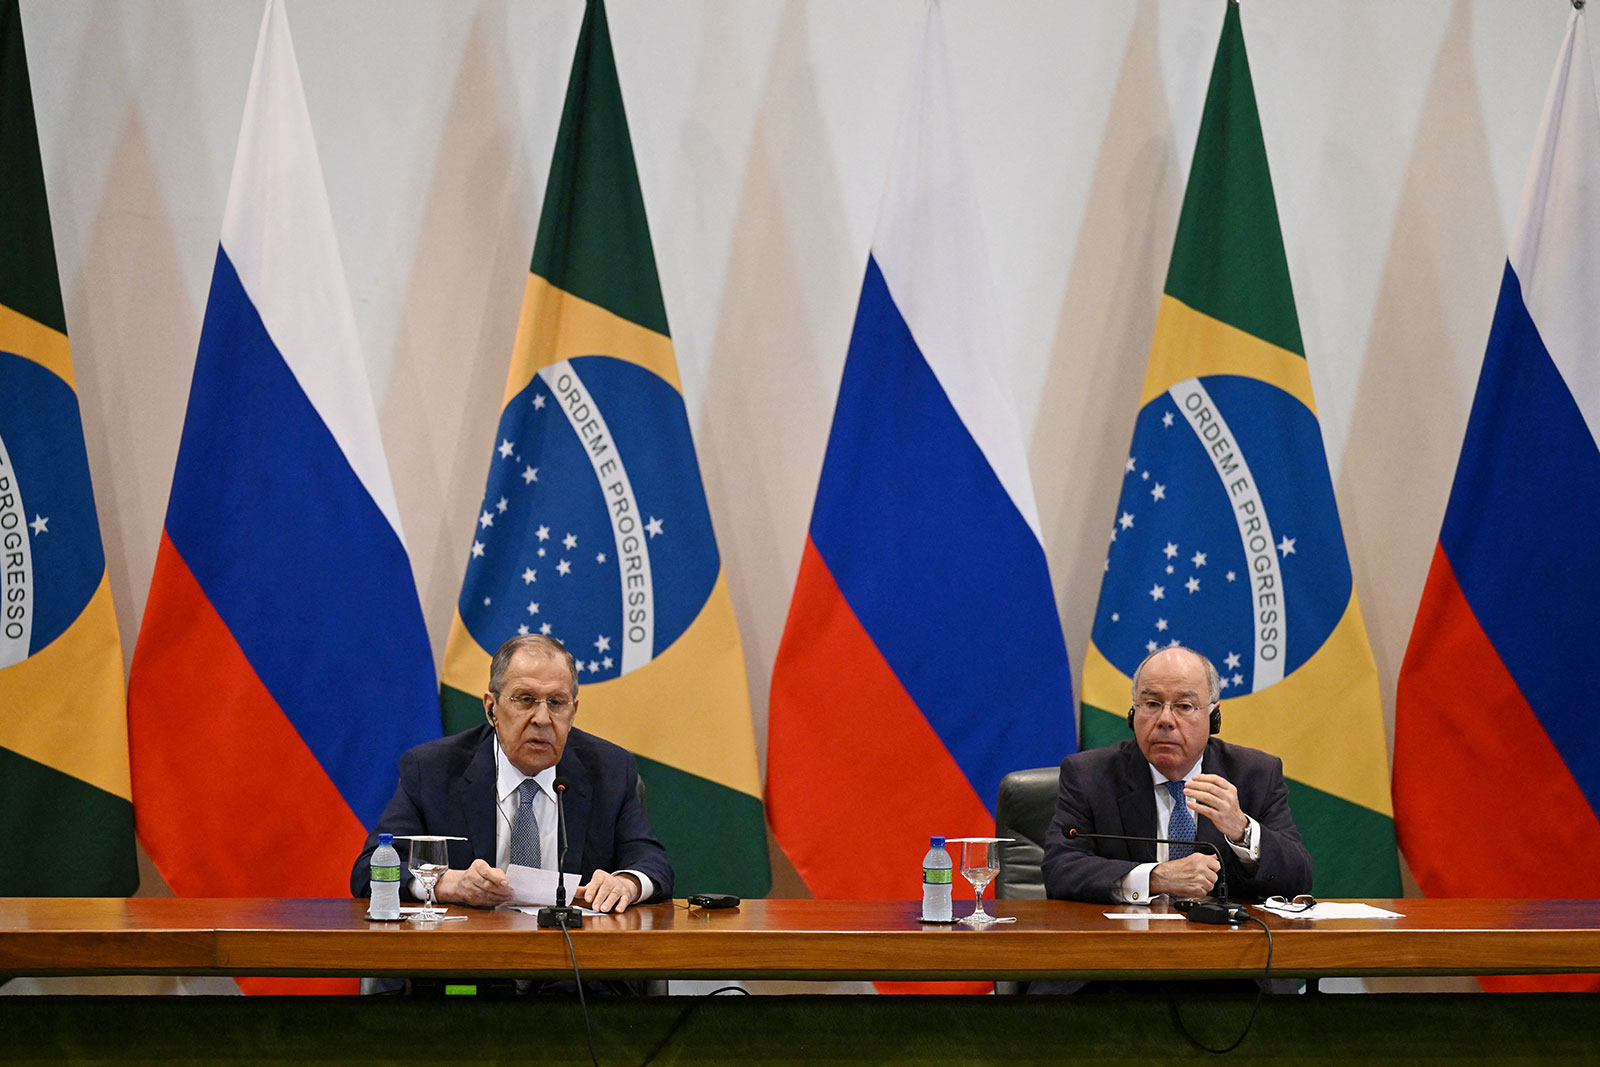 Russian Foreign Minister Sergey Lavrov, left, speaks during a joint press conference with his Brazilian counterpart Mauro Vieira, right, at Itamaraty Palace in Brasilia on April 17. 